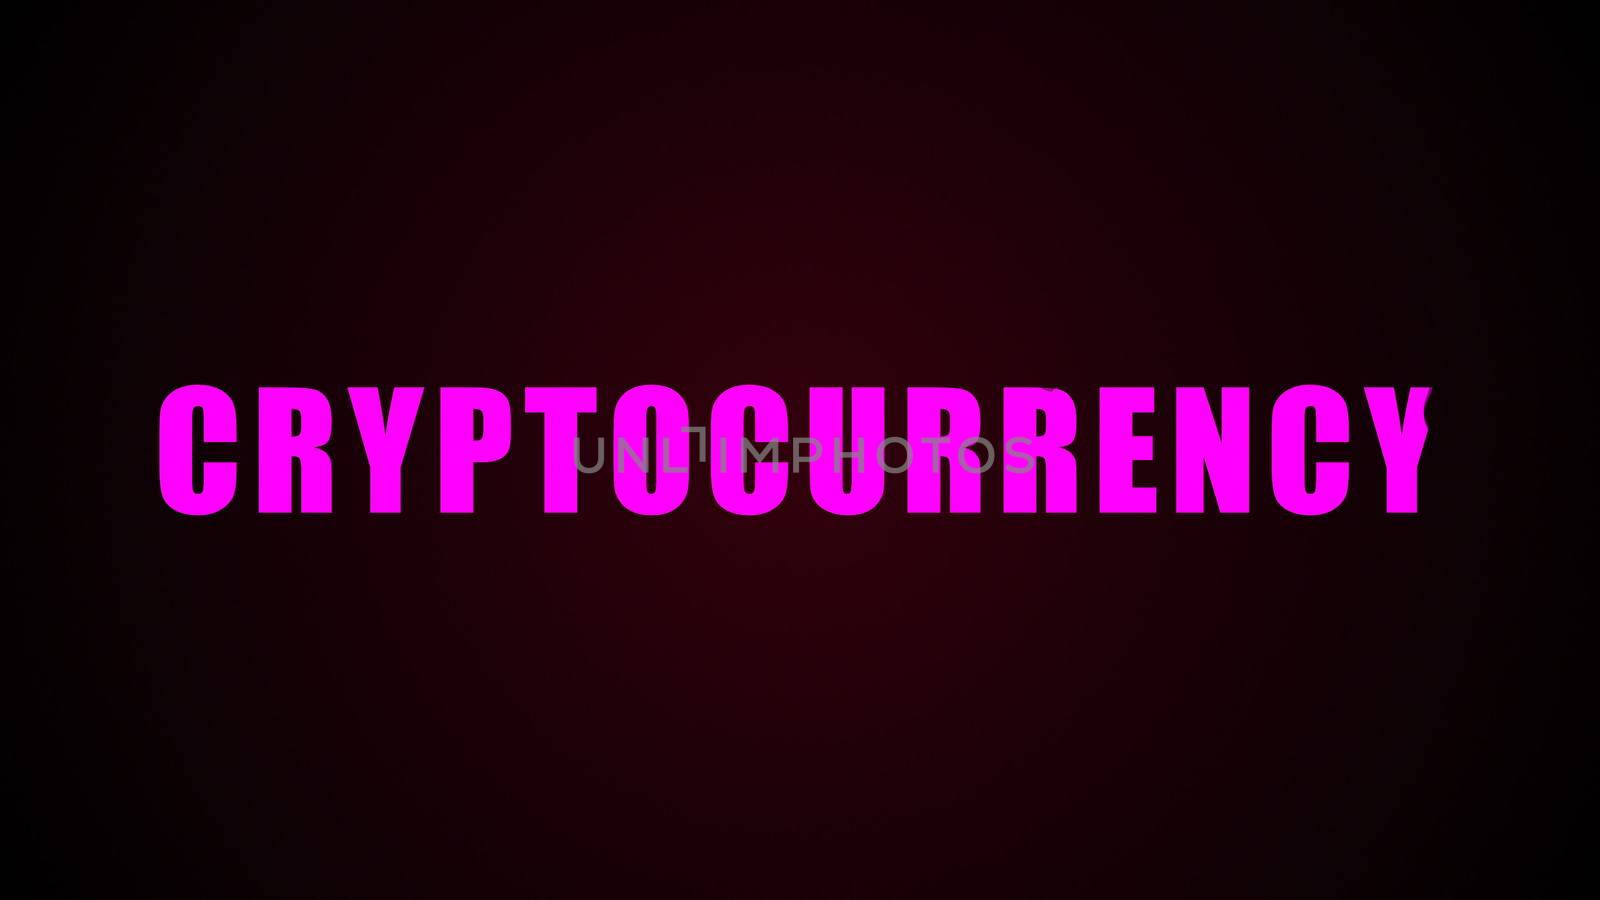 Cryptocurrency text. Abstract background. Digital 3d rendering